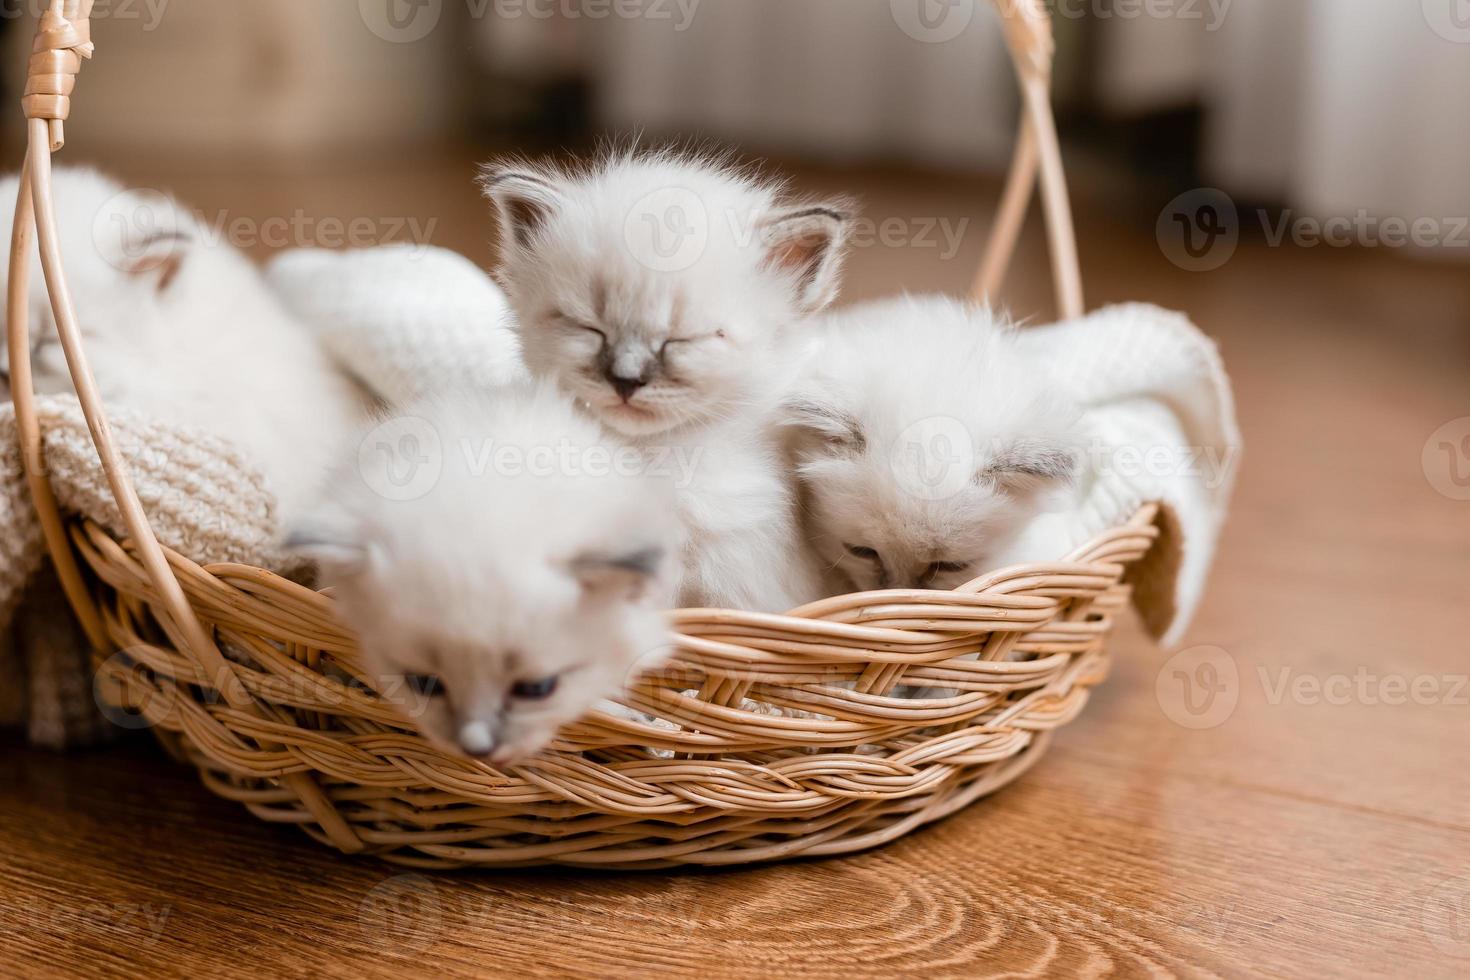 Closeup of a British shorthair kittens of silver color sleeping in a wicker basket standing on a wooden floor. Top view. Siberian nevsky masquerade cat color point. Pedigree pet. High quality photo